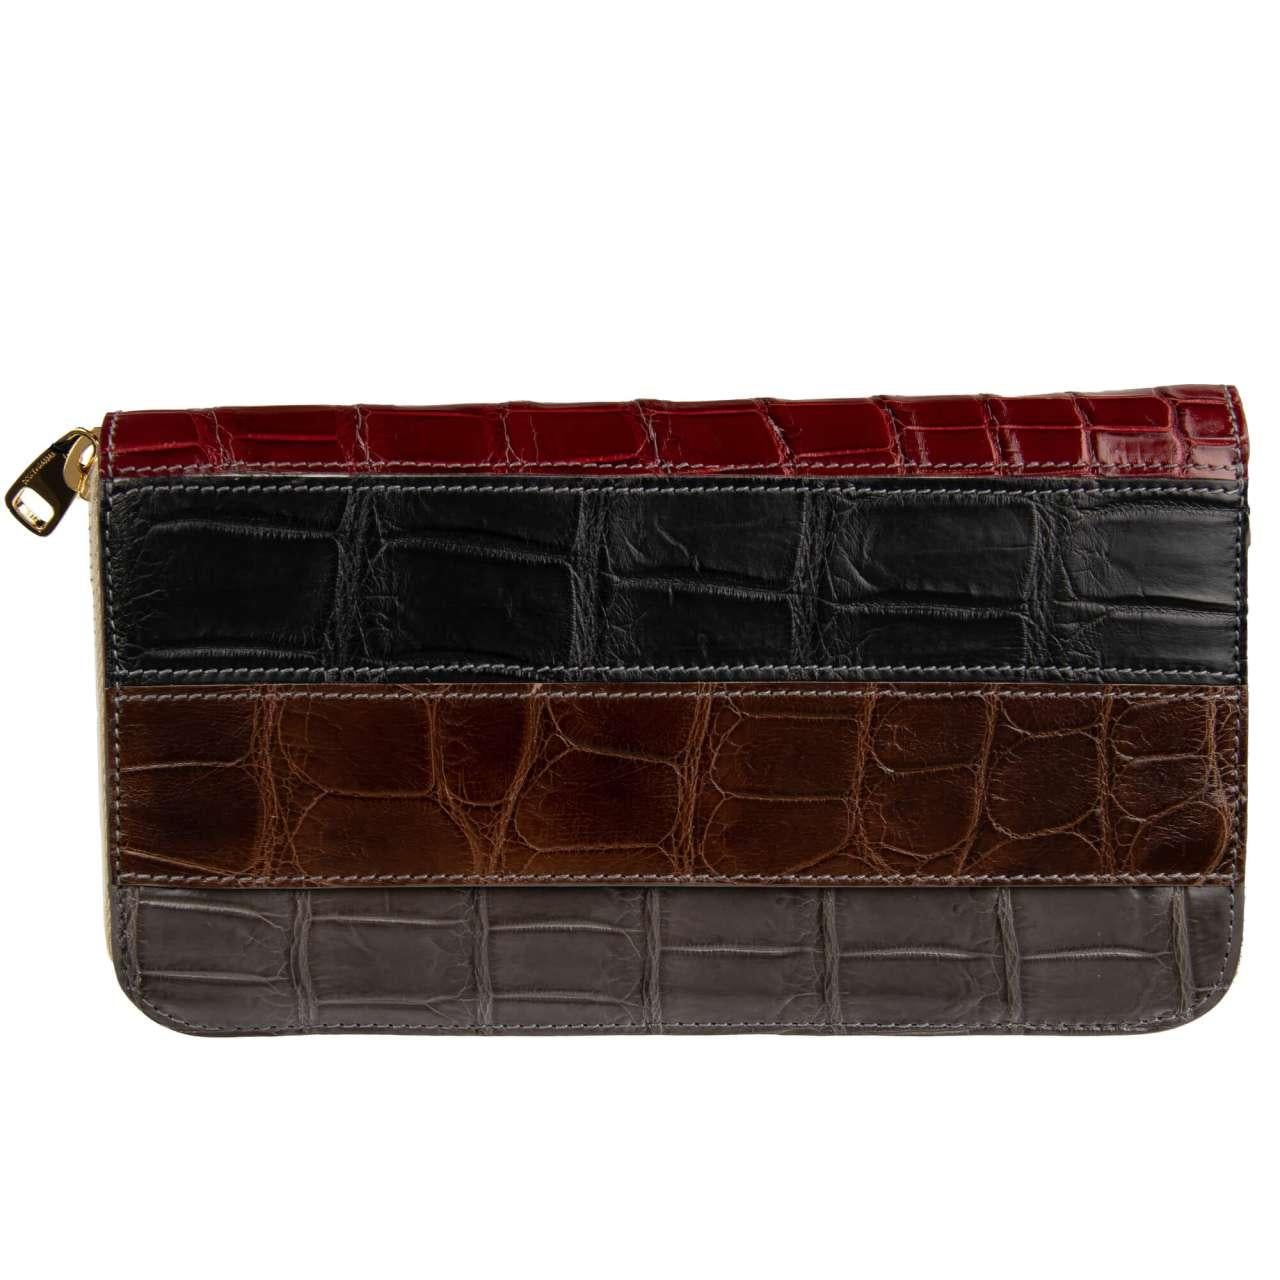 - Striped Crocodile Leather Patchwork Zip-Around wallet with logo plate in black, gray, brown and red by DOLCE & GABBANA - New with Tag and Authenticity Card - MADE IN ITALY - Former RRP: EUR 2.350 - Model: BI0473-B213R-80995 - Material: 100%